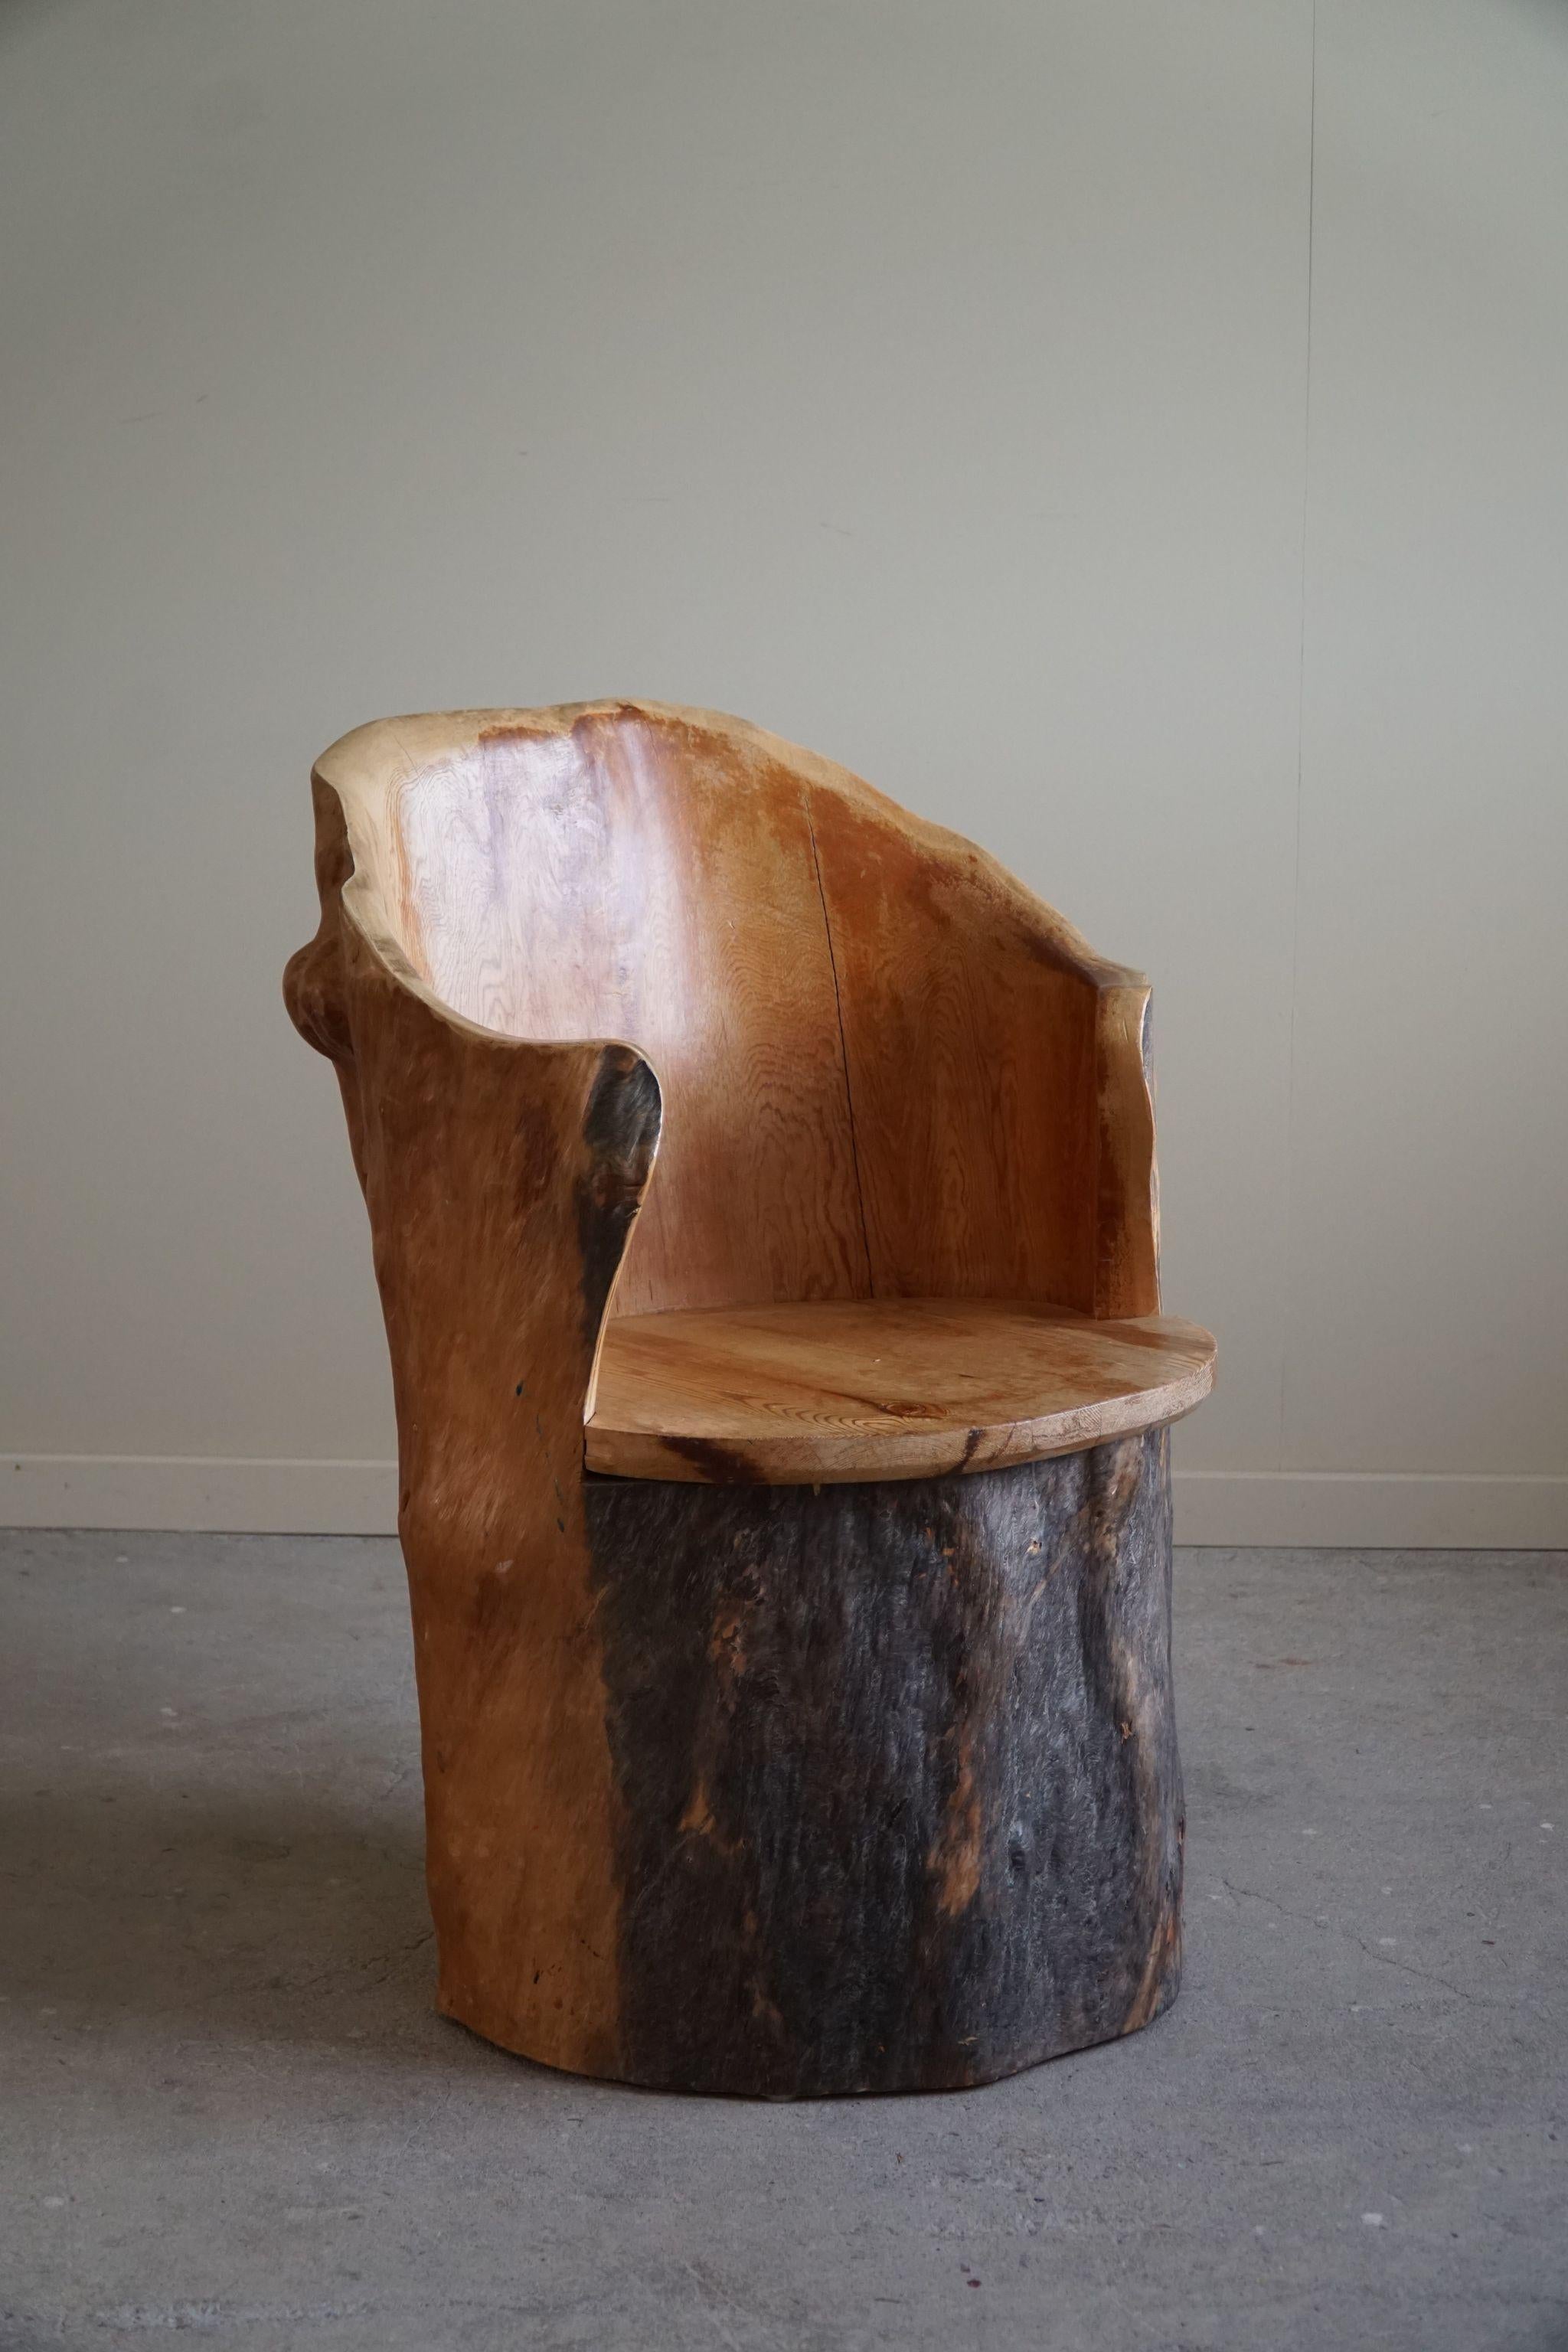 Hand-Carved Brutalist Stump Chair in Solid Pine, Wabi Sabi Style, Swedish, 1970s For Sale 6